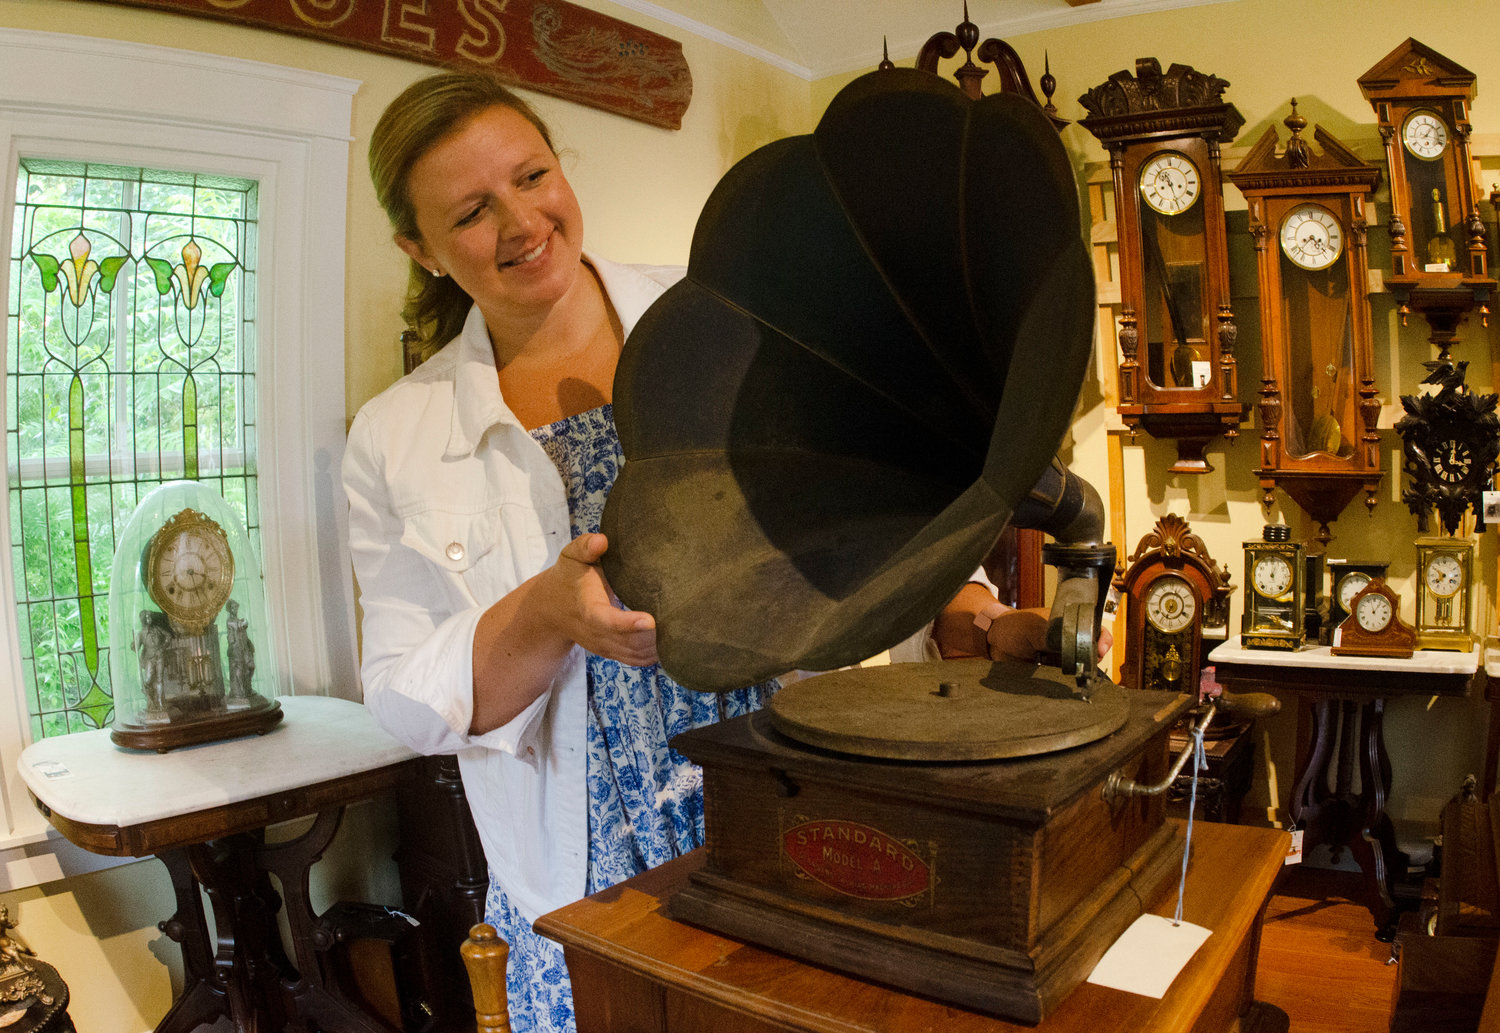 Cory Farms Past & Presents employee Emily Hughes holds up an antique phonograph that’s for sale at the store, which is celebrating its 10th anniversary.